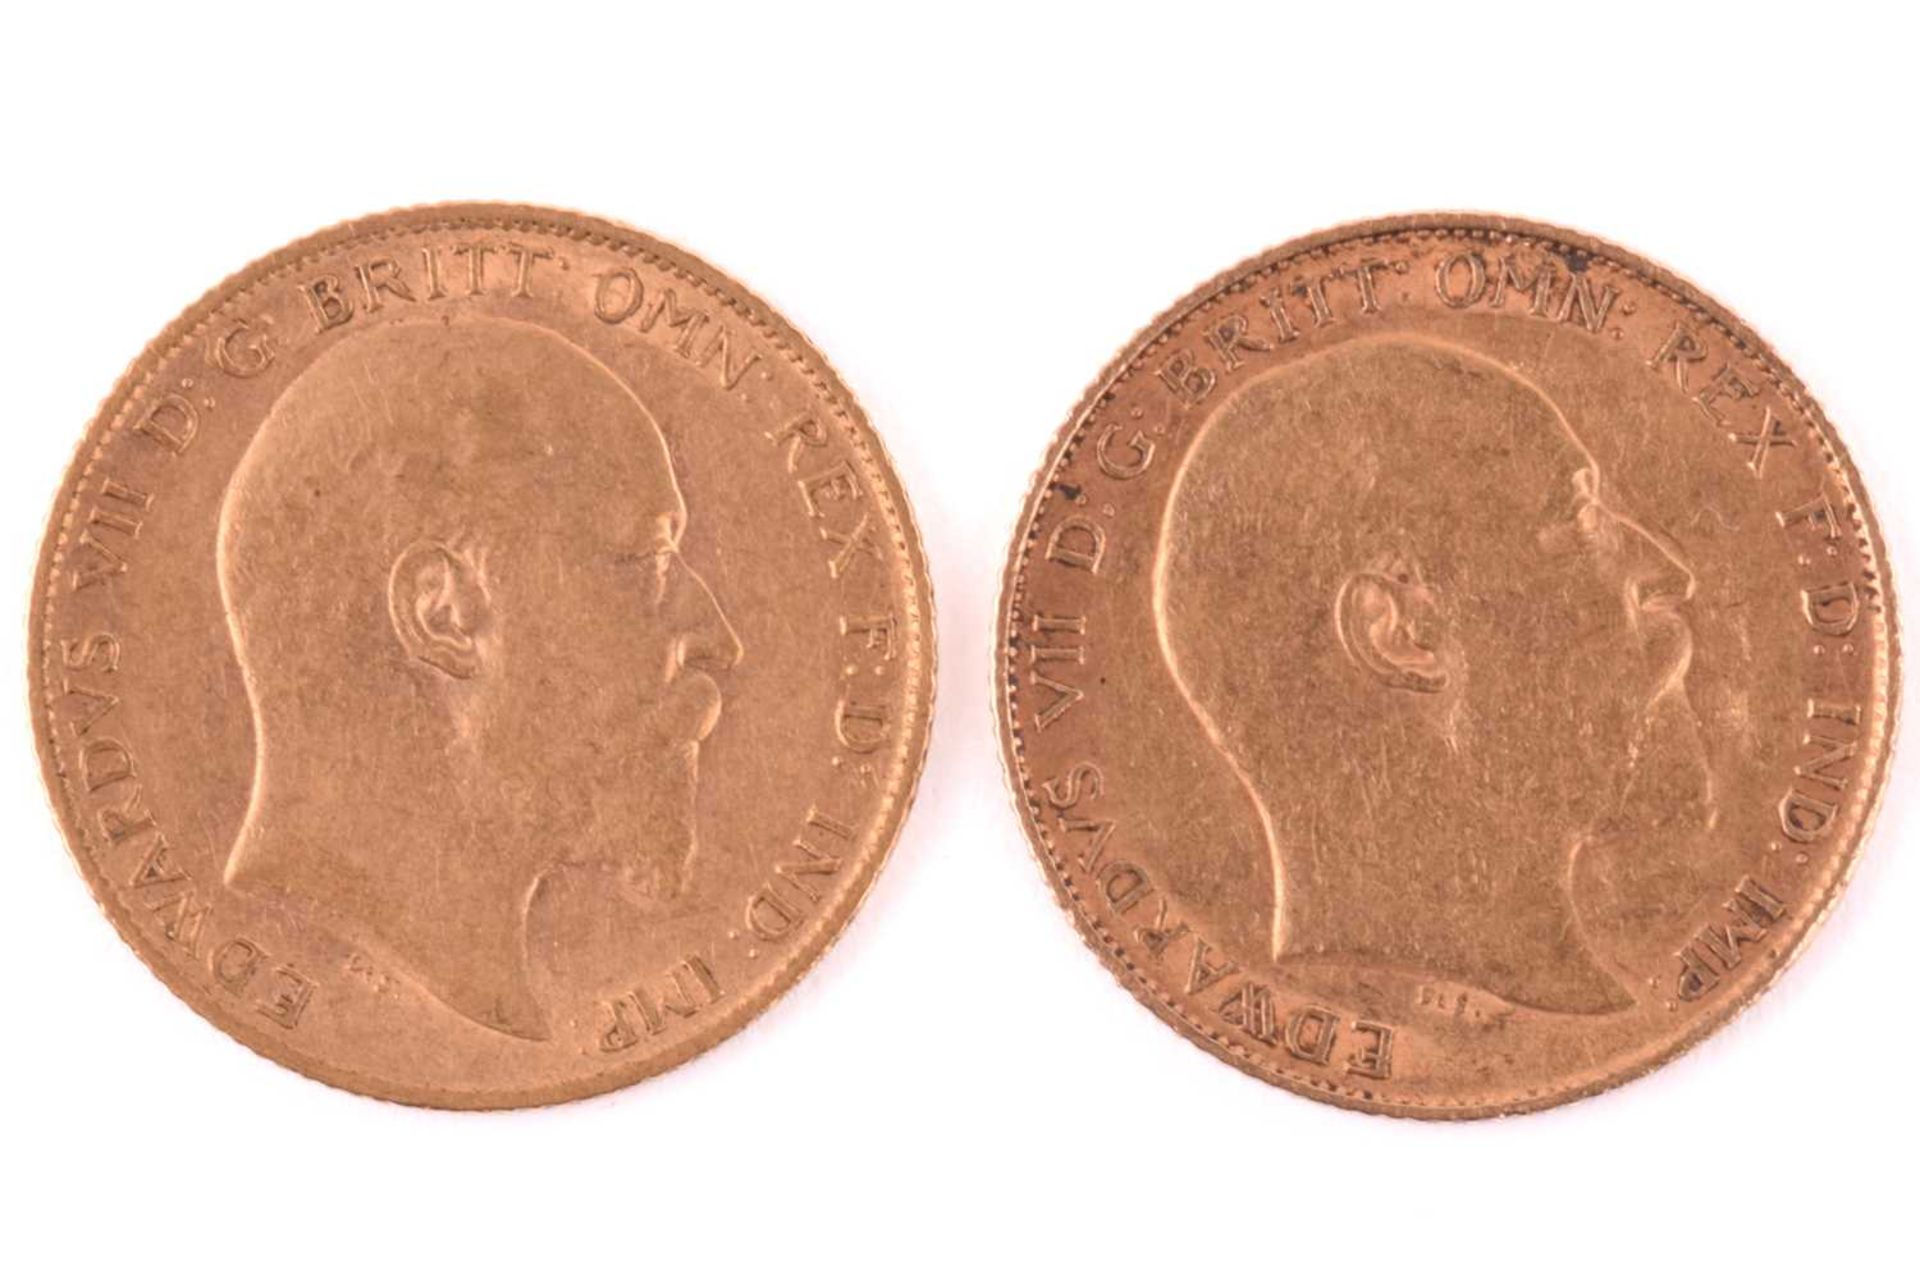 Two Edward VII half sovereigns both 1908, obervse with bare head facing right - Image 2 of 2